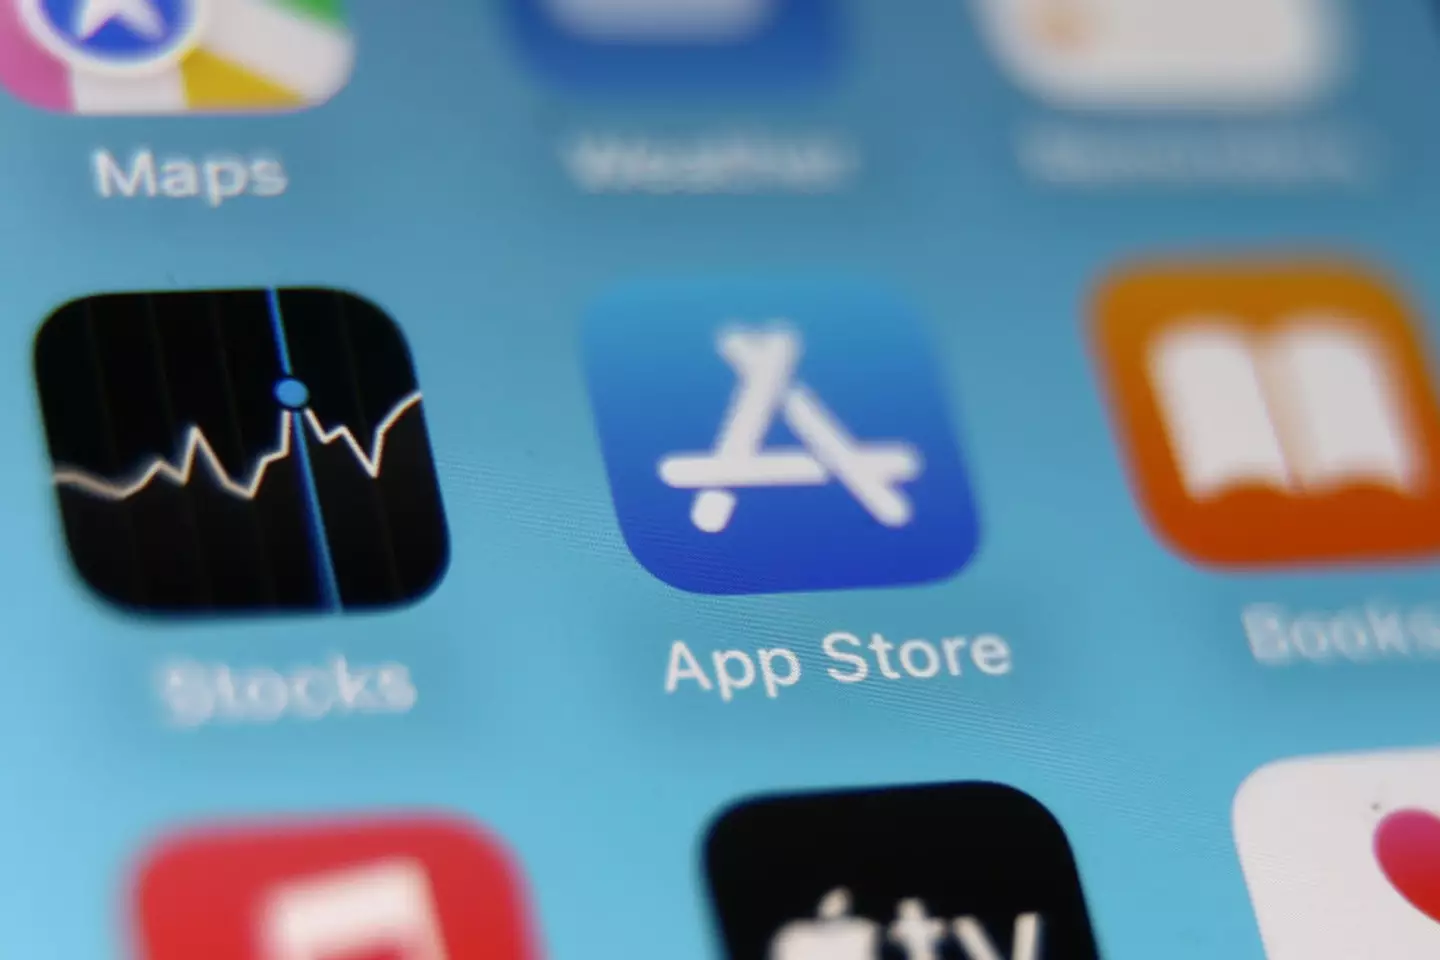 Huge changes are coming to Apple's App Store.